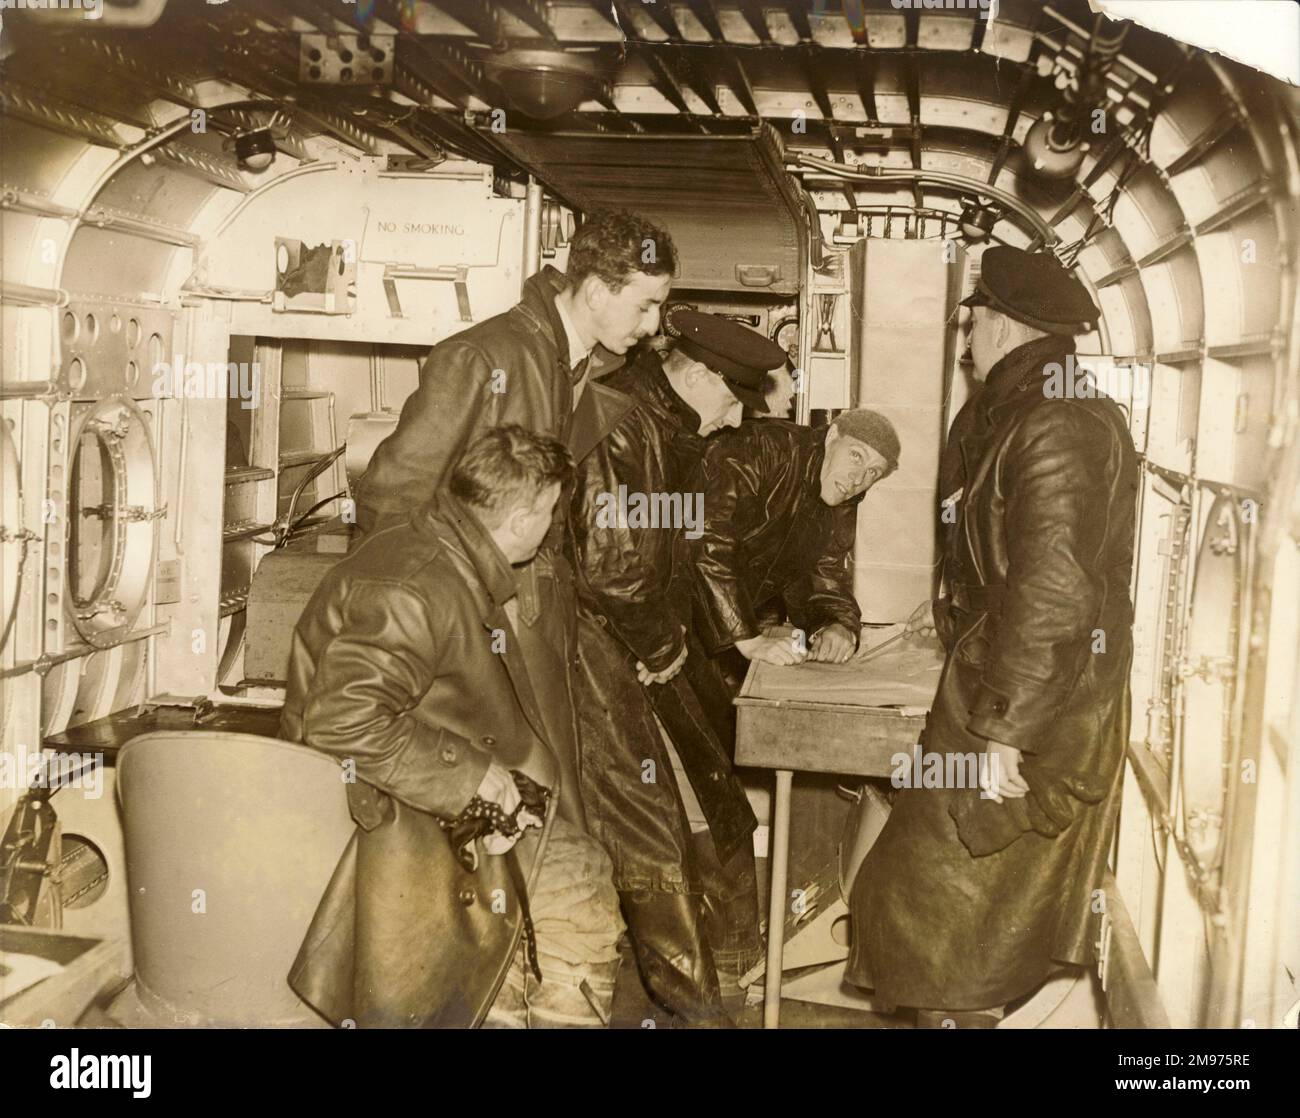 Receiving instructions on flying boats in the cabin of a Short S8/8 Rangoon flying boat at The Air University, Hamble, Hants. From right: Seaplane Instructor Flt Lt Pascoe, First Officer J.F. Nicholas (leaning on table) and First Officer F.D. Smith, with two other students. [see also 56011039] Stock Photo